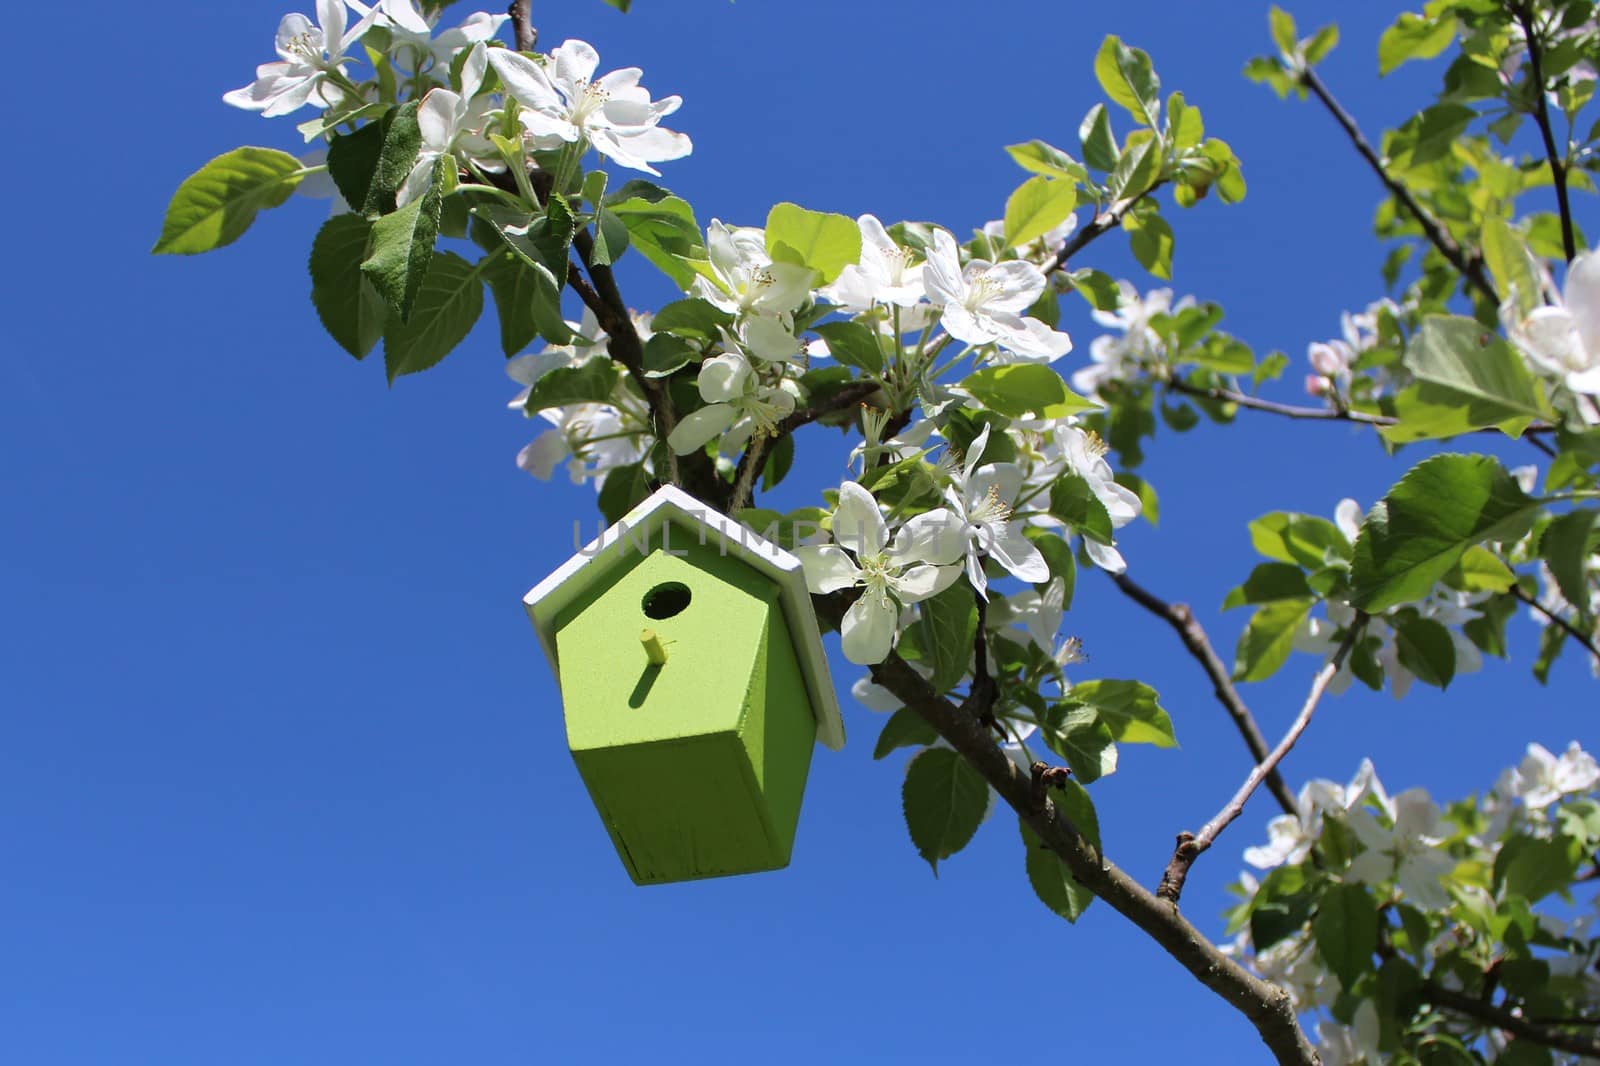 birdhouse in the blossoming apple tree by martina_unbehauen